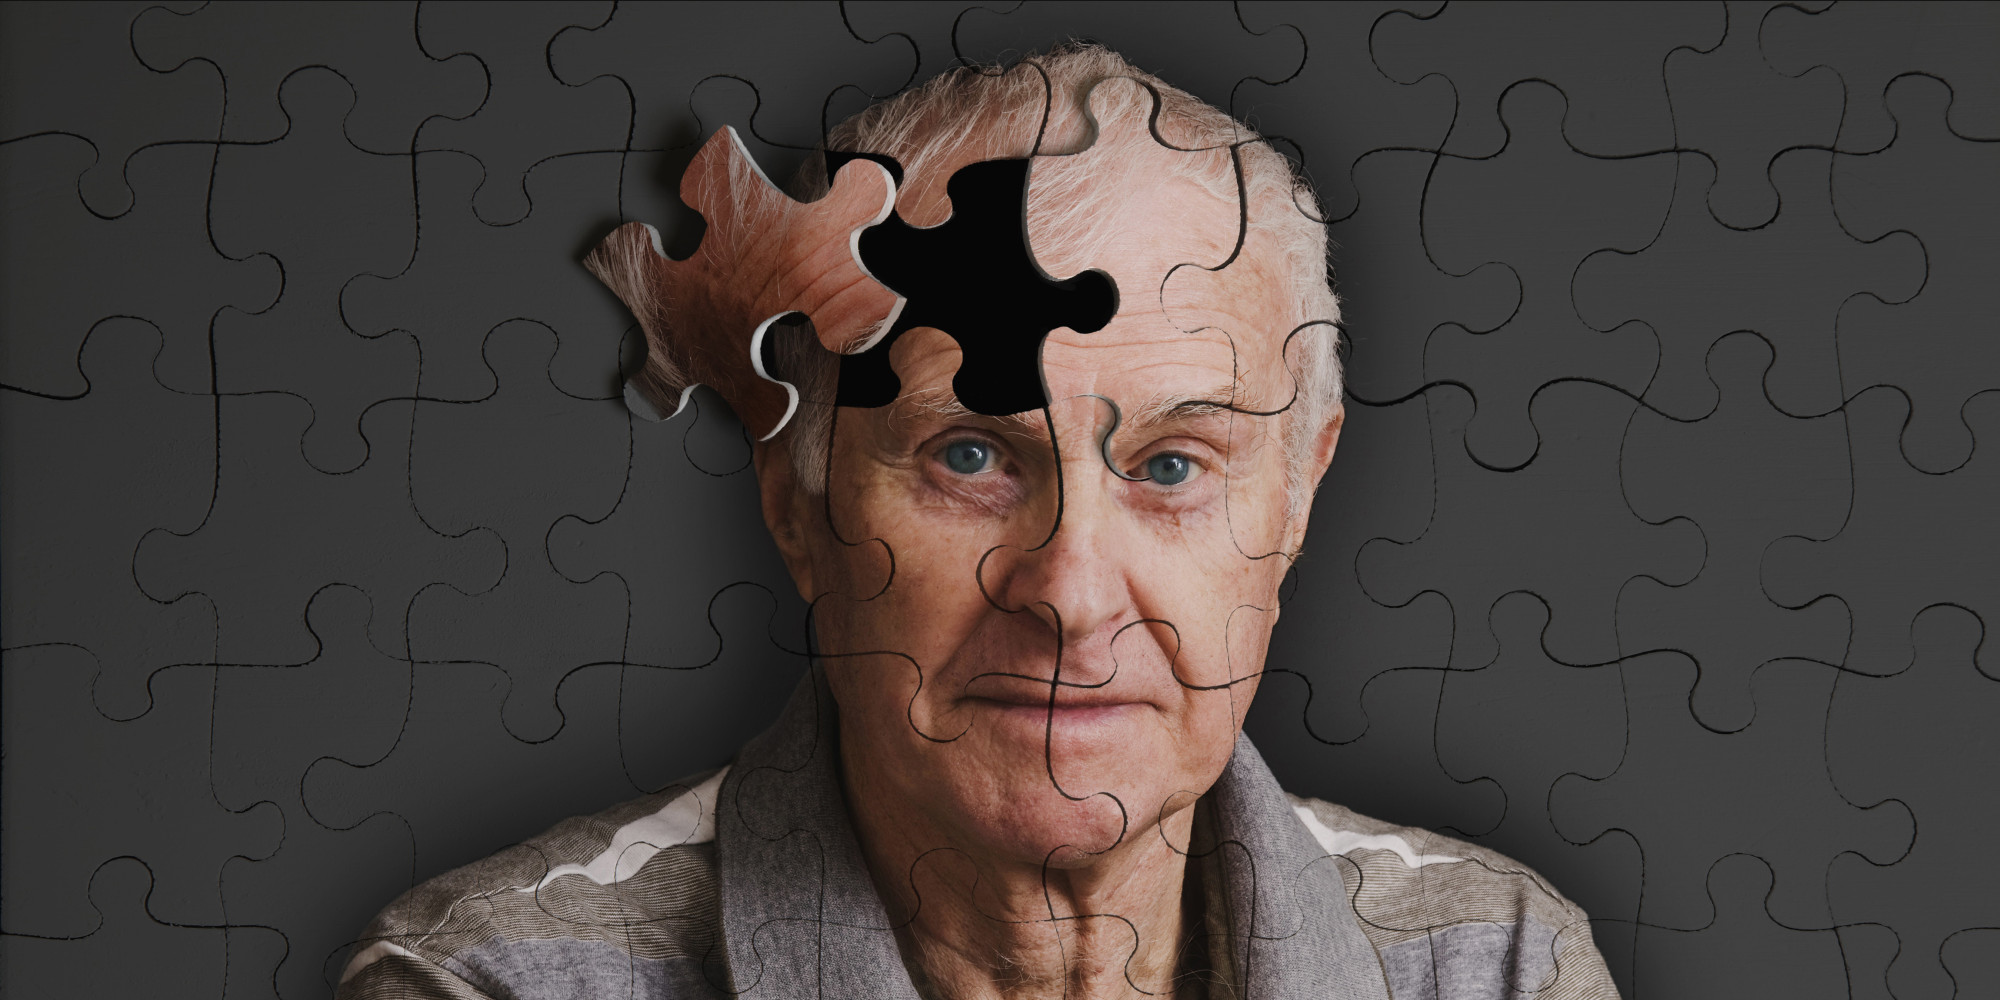 study-detection-is-the-best-cure-for-alzheimer-s-huffpost